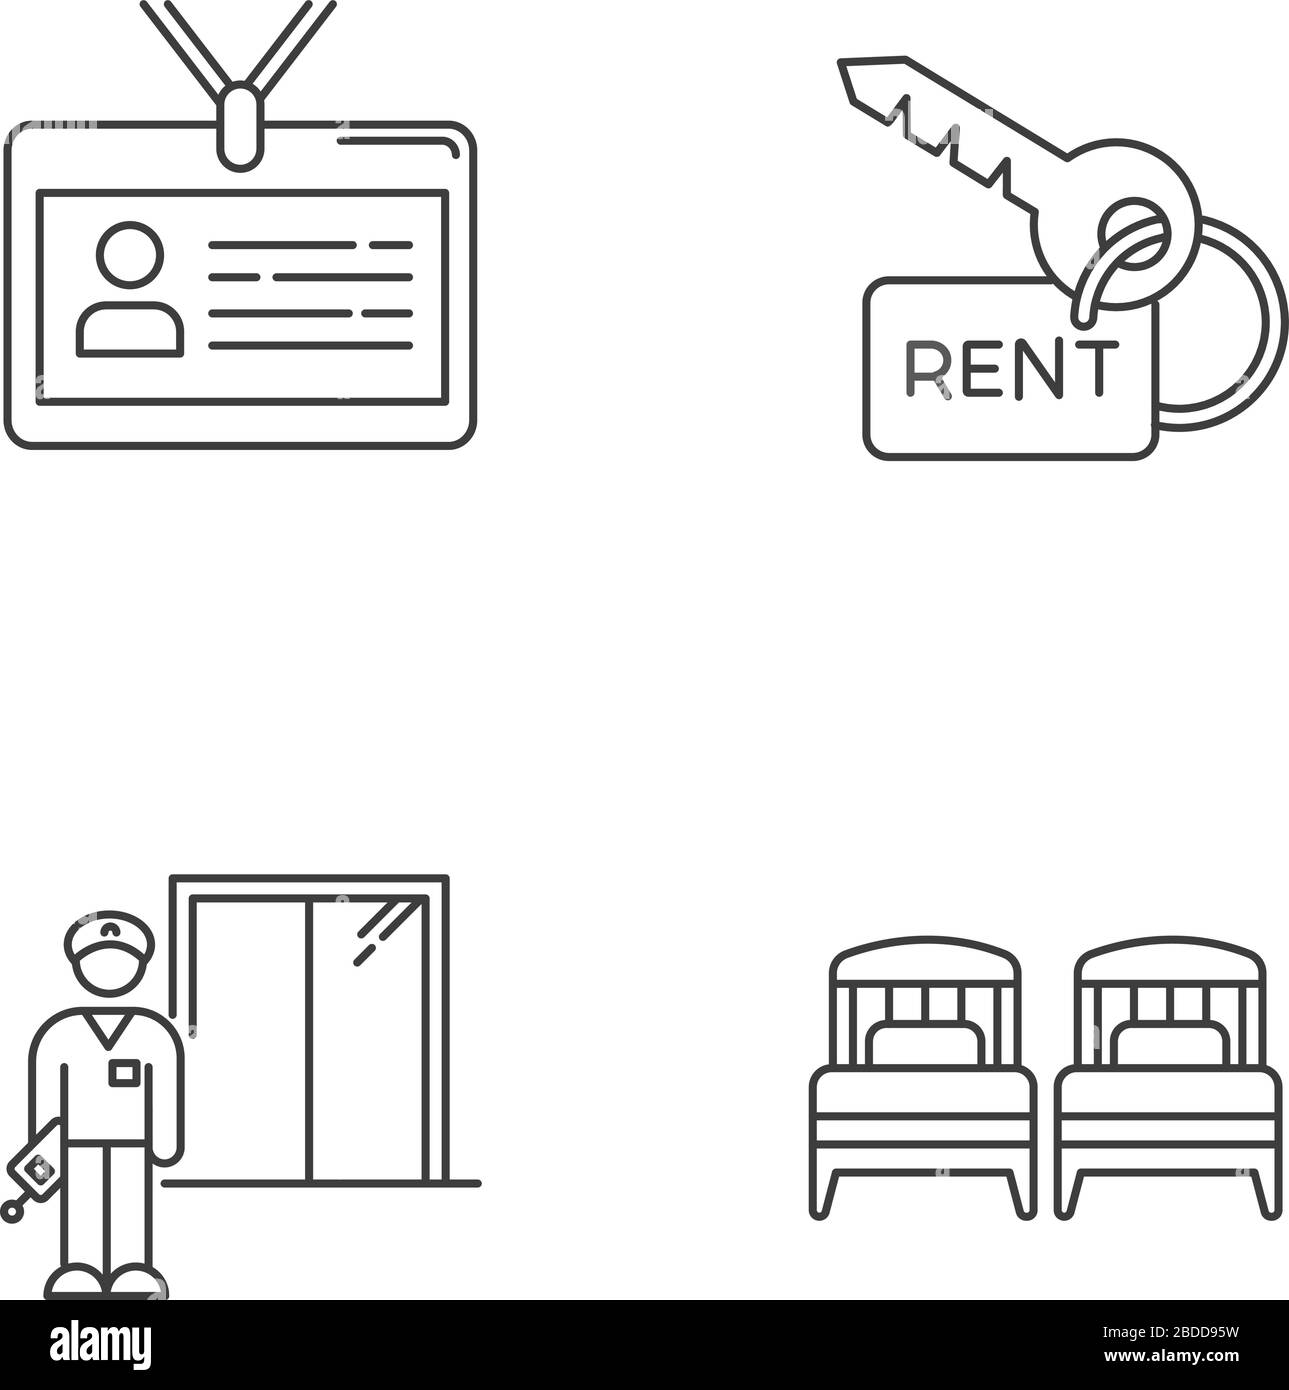 https://c8.alamy.com/comp/2BDD95W/renting-hotel-room-pixel-perfect-linear-icons-set-single-beds-apartment-key-rental-service-customizable-thin-line-contour-symbols-isolated-vector-2BDD95W.jpg